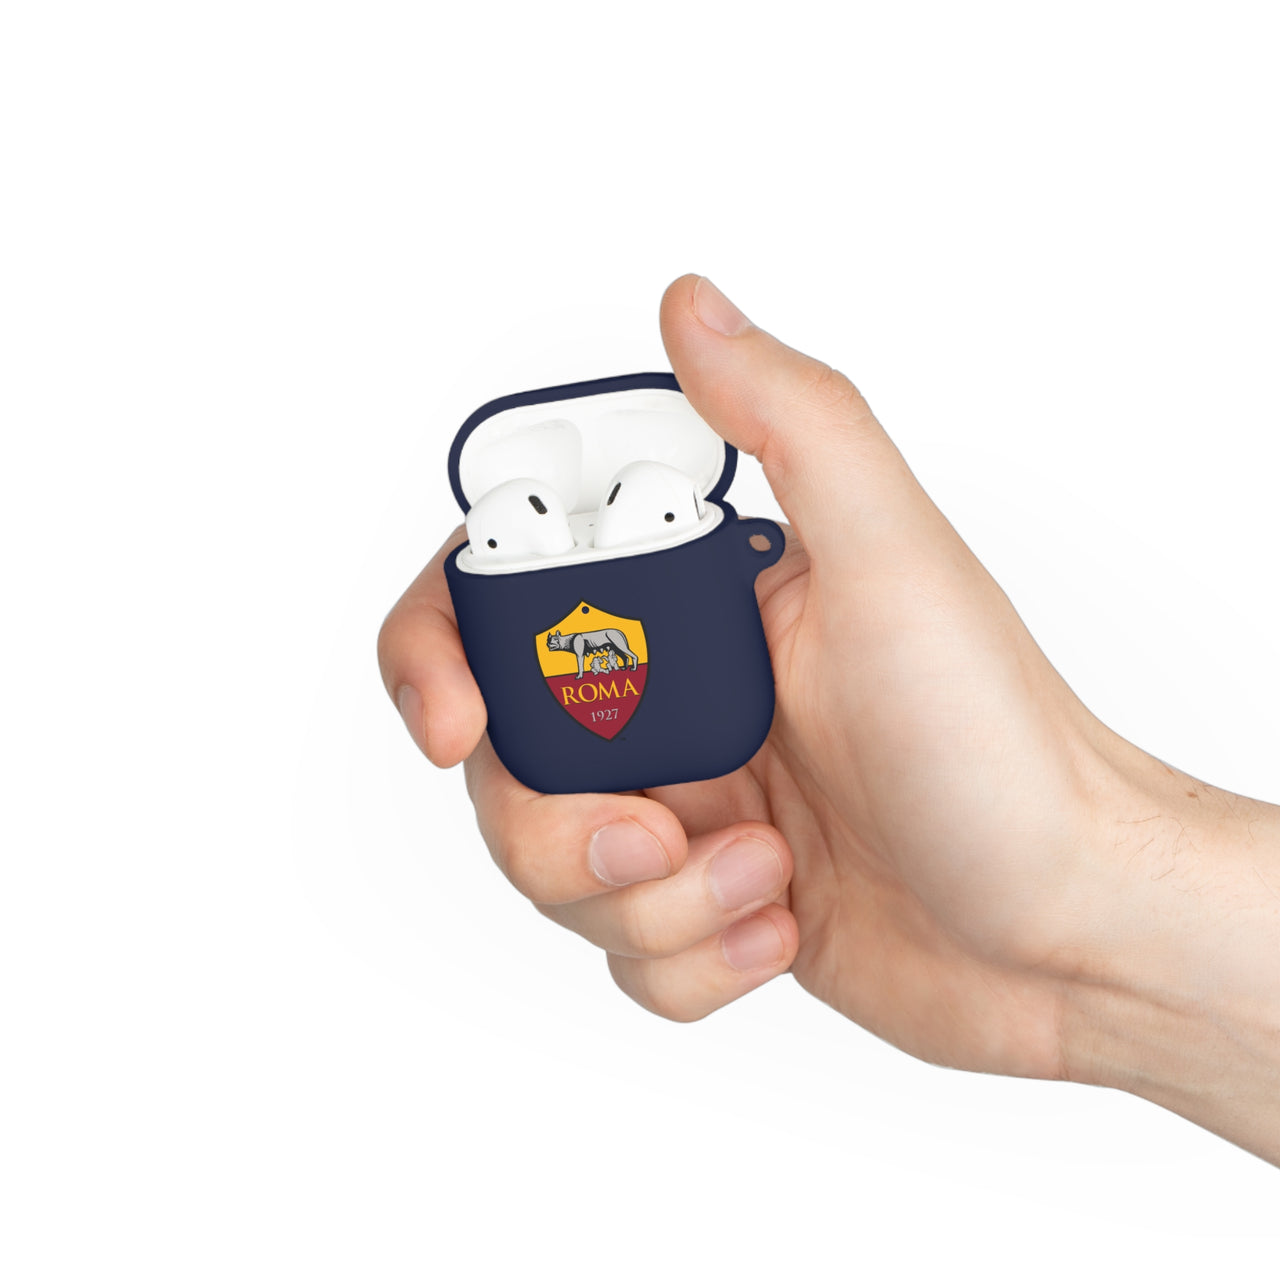 Roma AirPods and AirPods Pro Case Cover